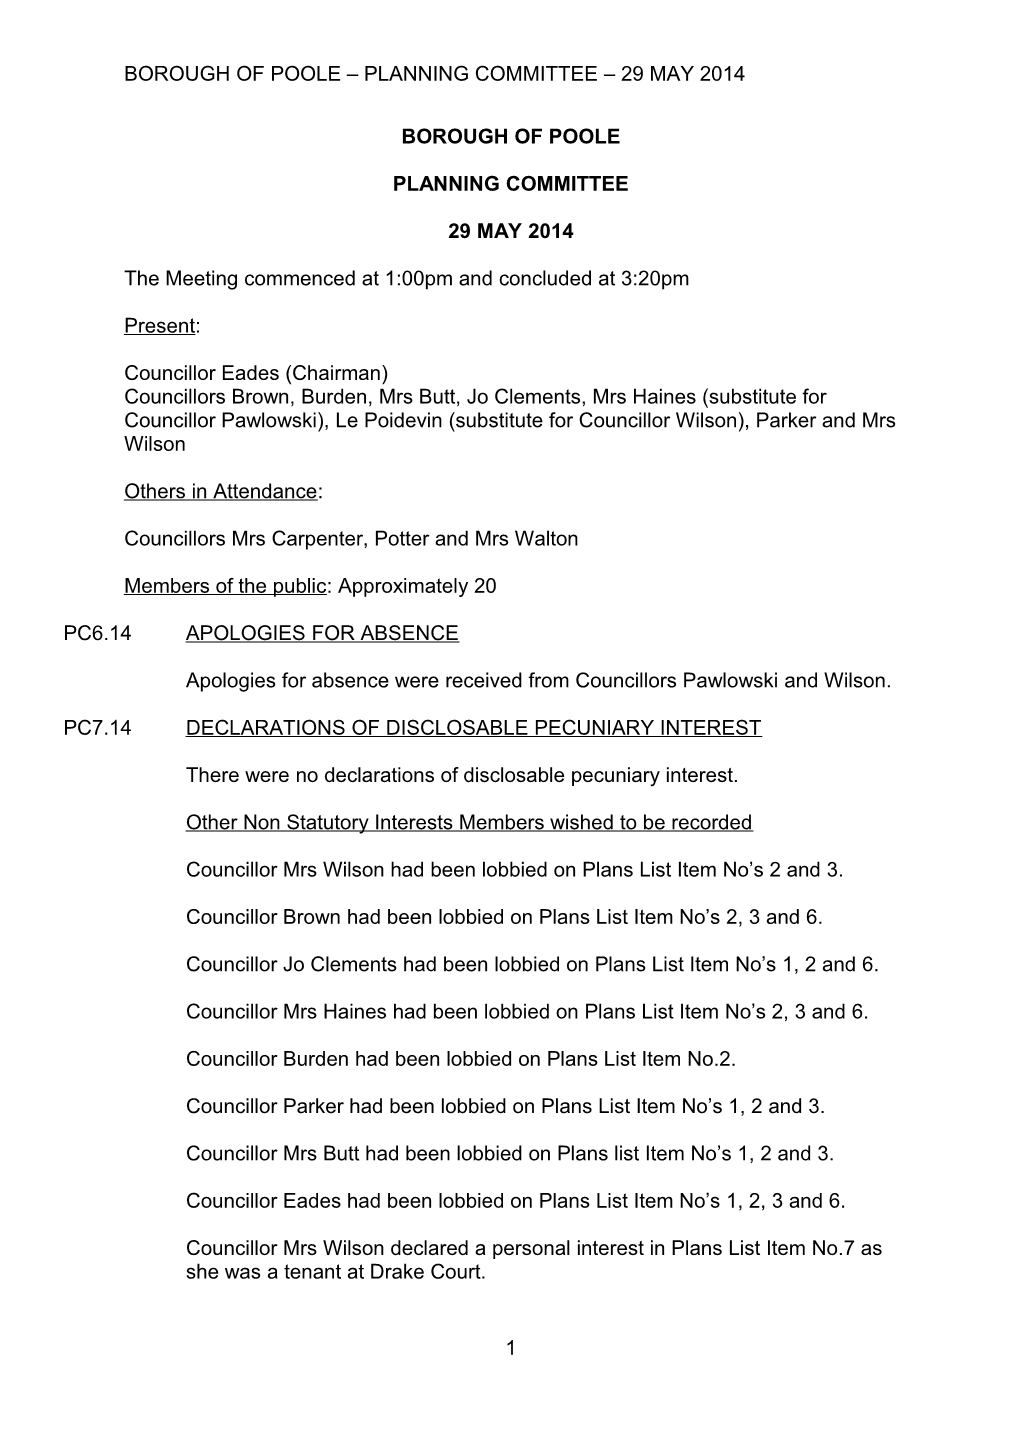 Borough of Poole Planning Committee 29 May 2014